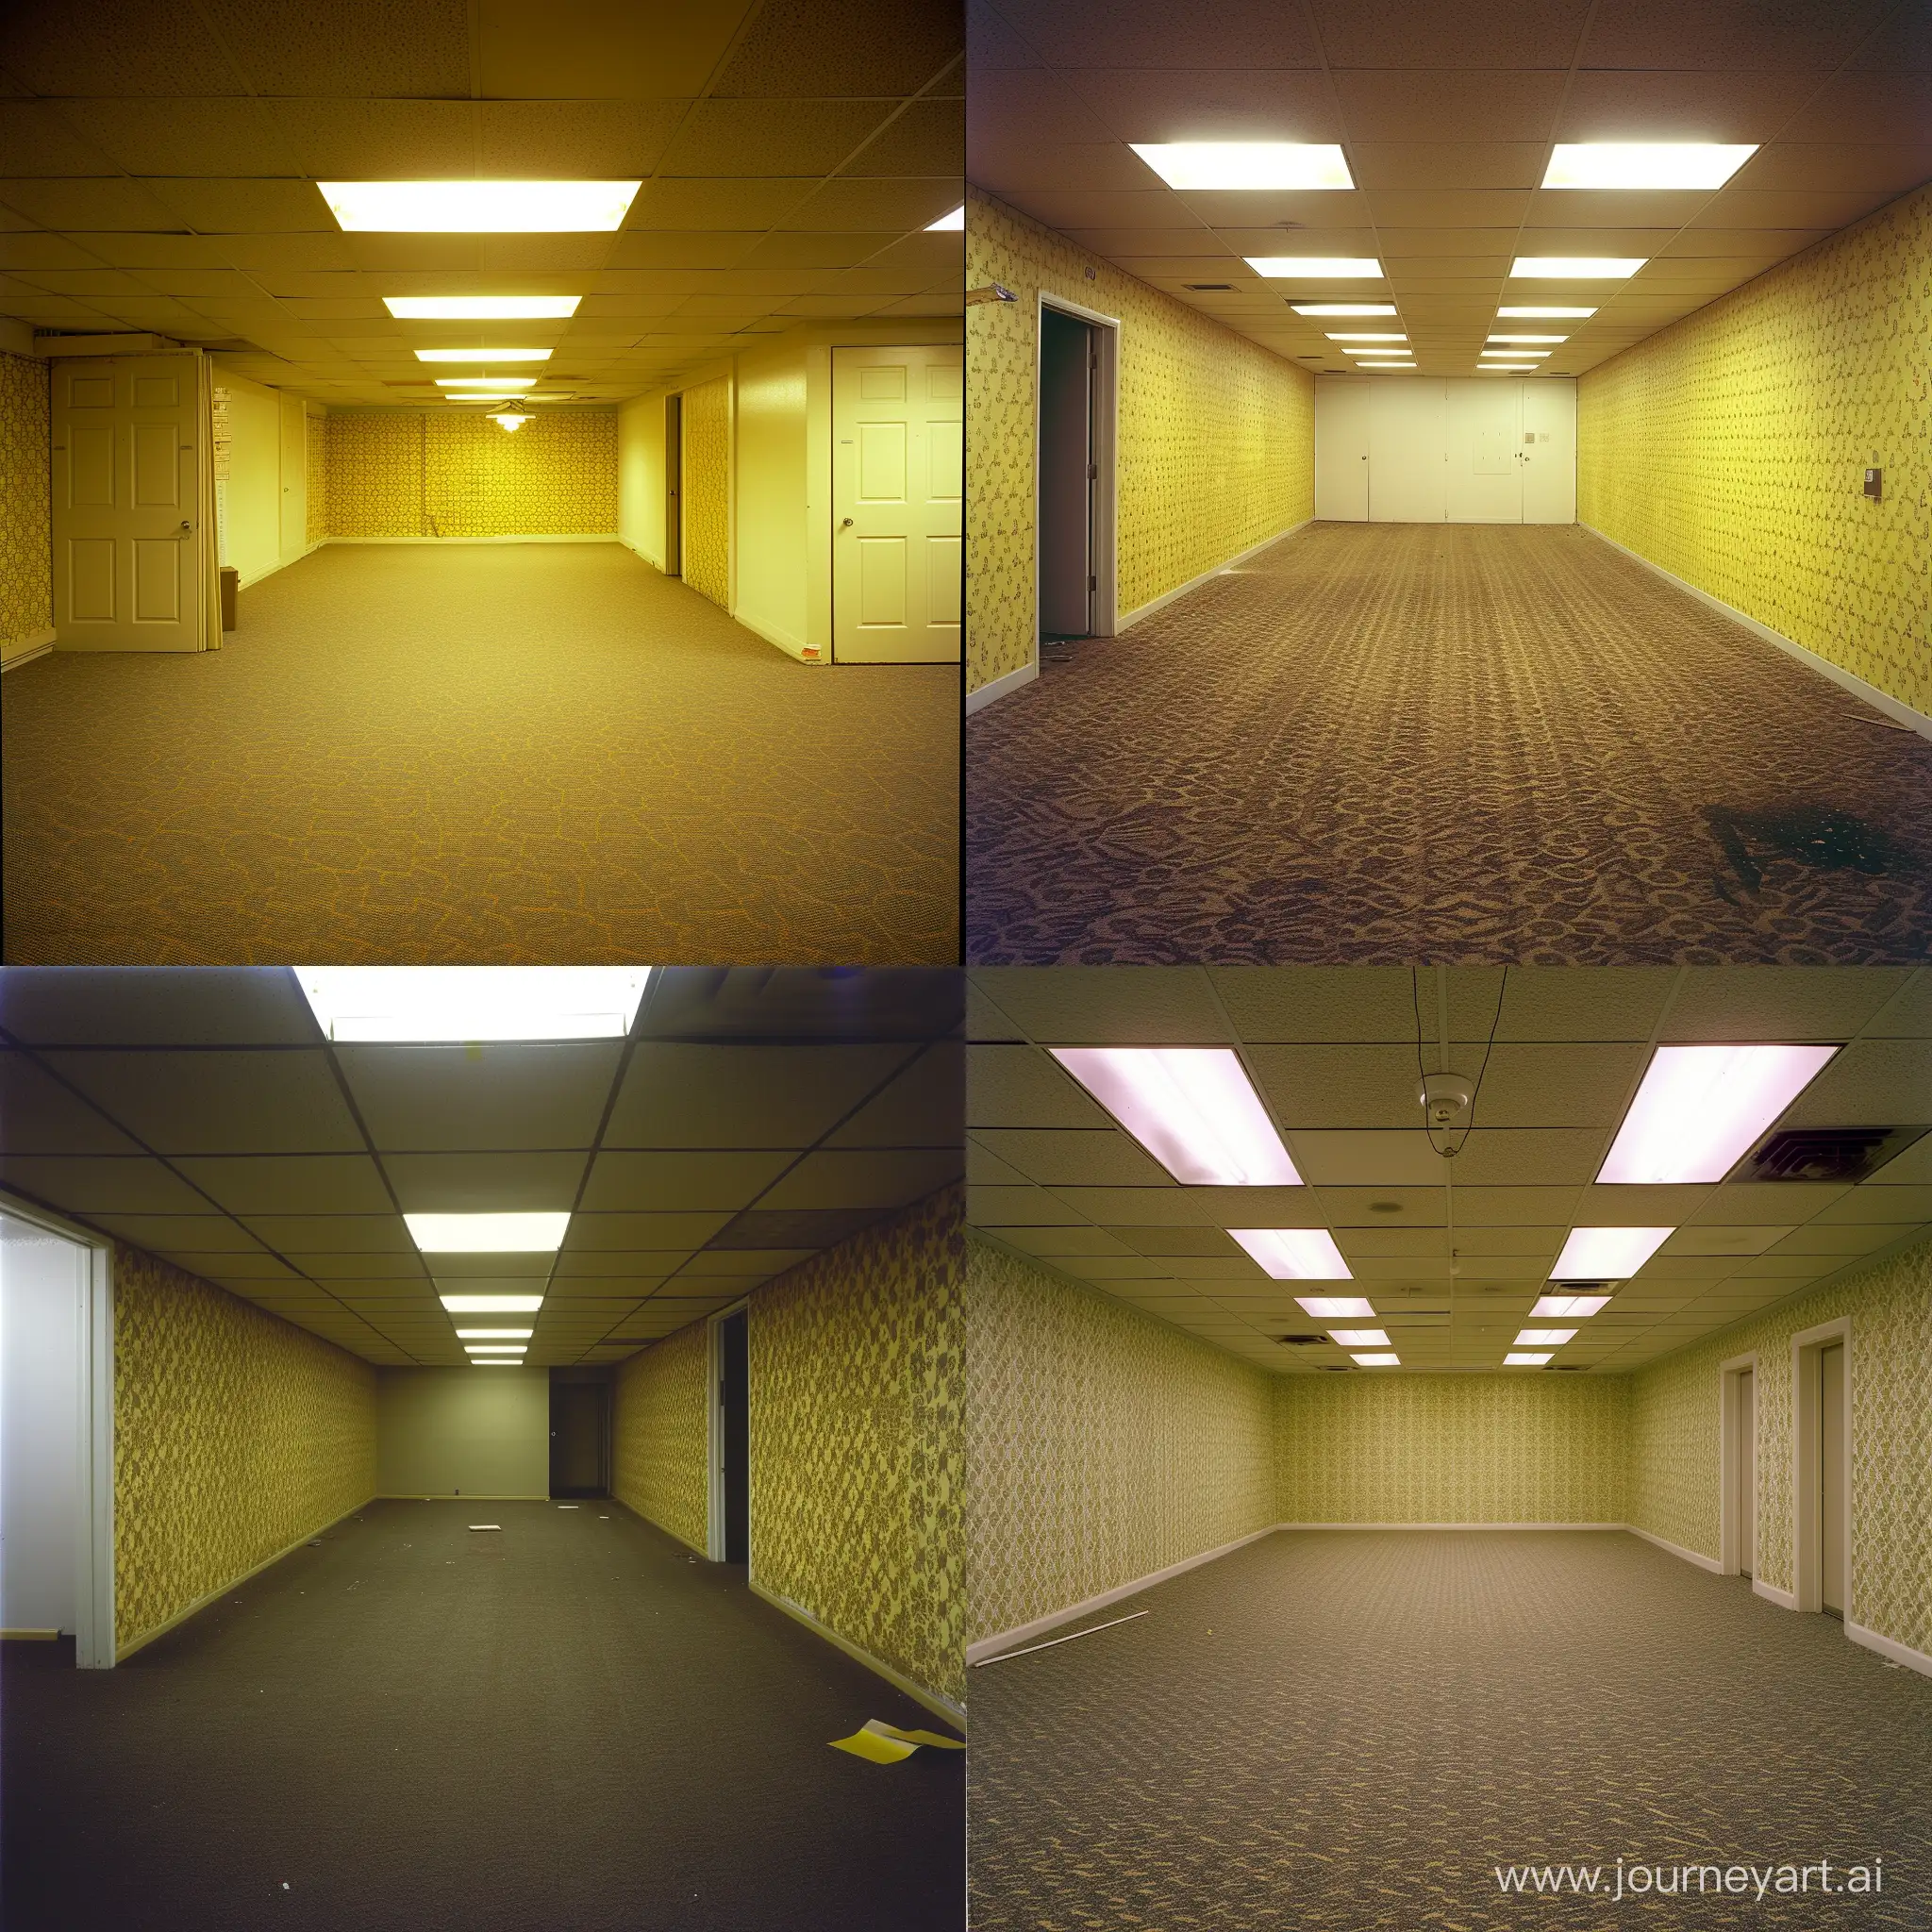 Liminal space, the backrooms, office/thrift store/social hall, carpet, empty, fluorescent lighting, monochrome yellow wallpaper, early 2000s camcorder footage, nonsensical architecturesourceid=chrome